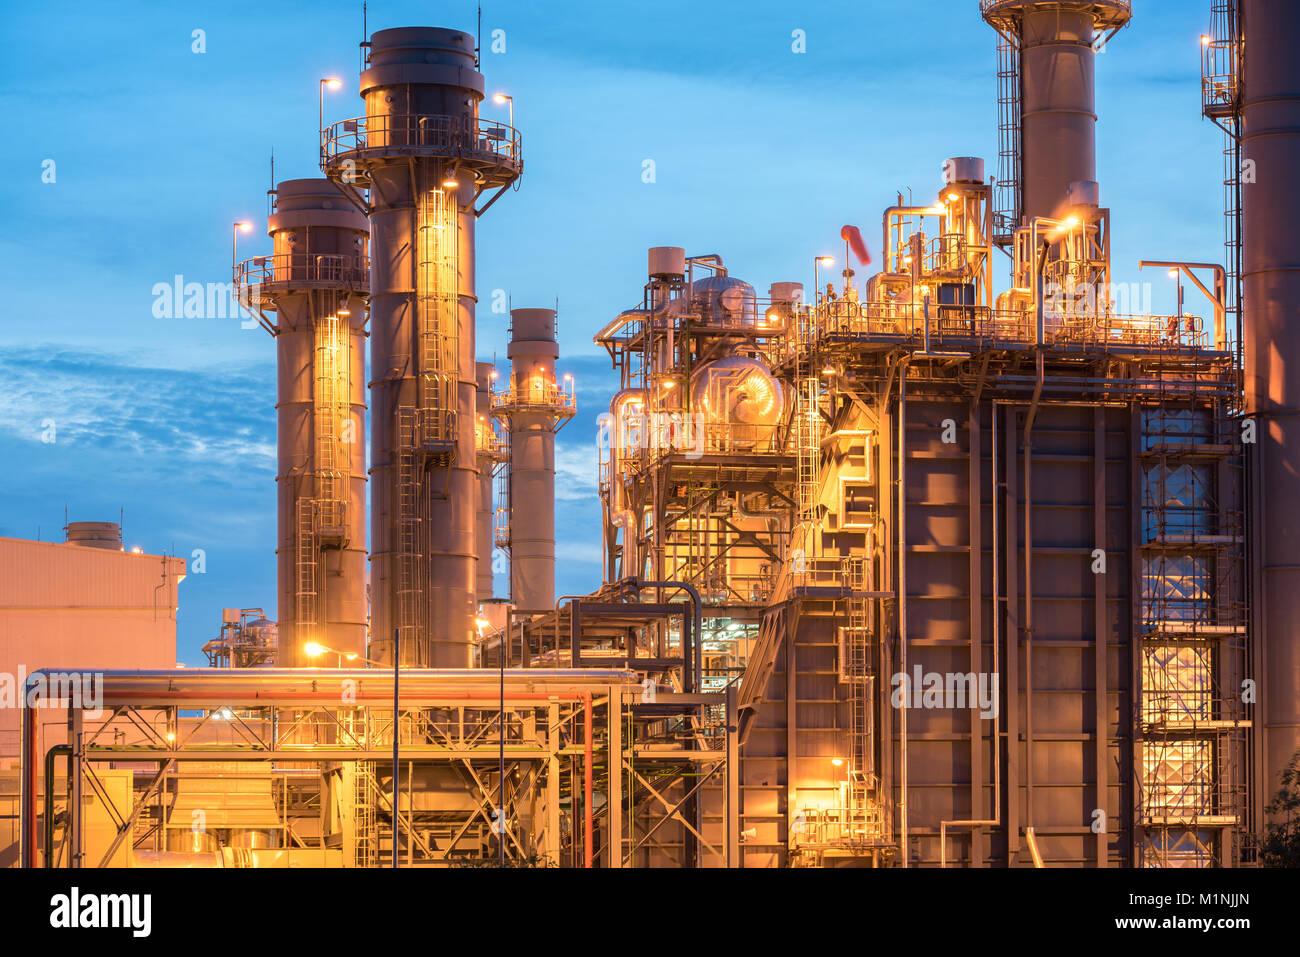 Oil and gas refinery industry Factory at sunset Stock Photo